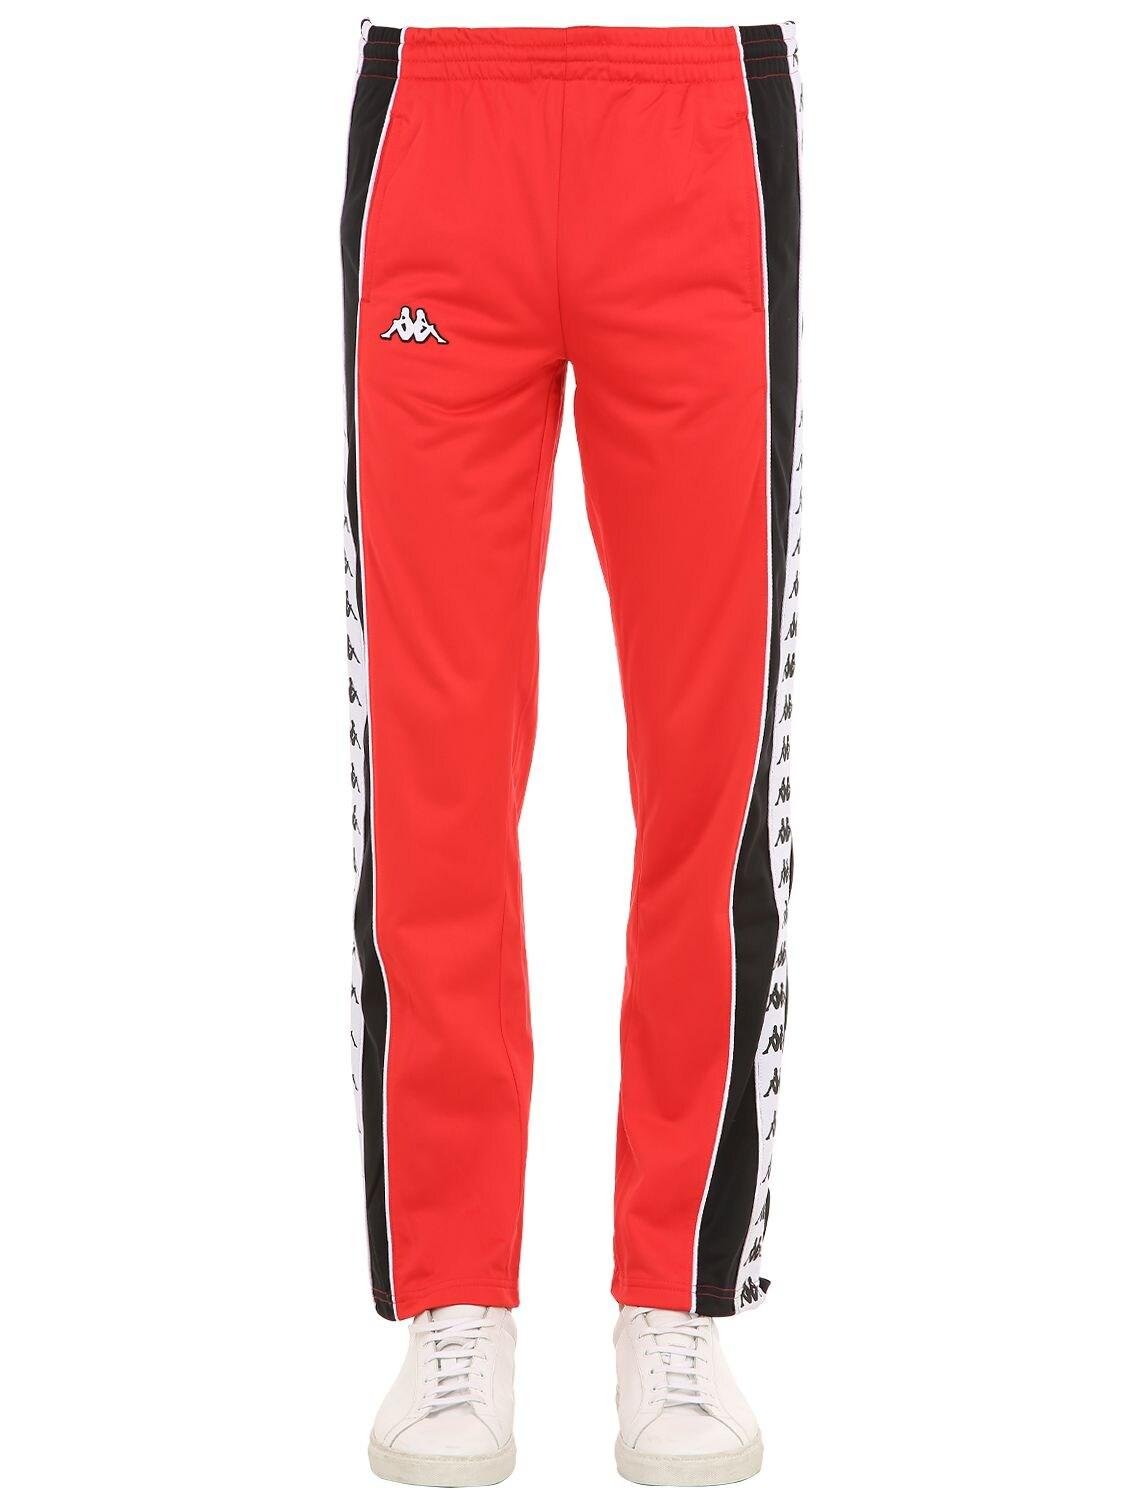 Kappa Track Pants W/ Snap Button Side Bands in Red for Men - Lyst